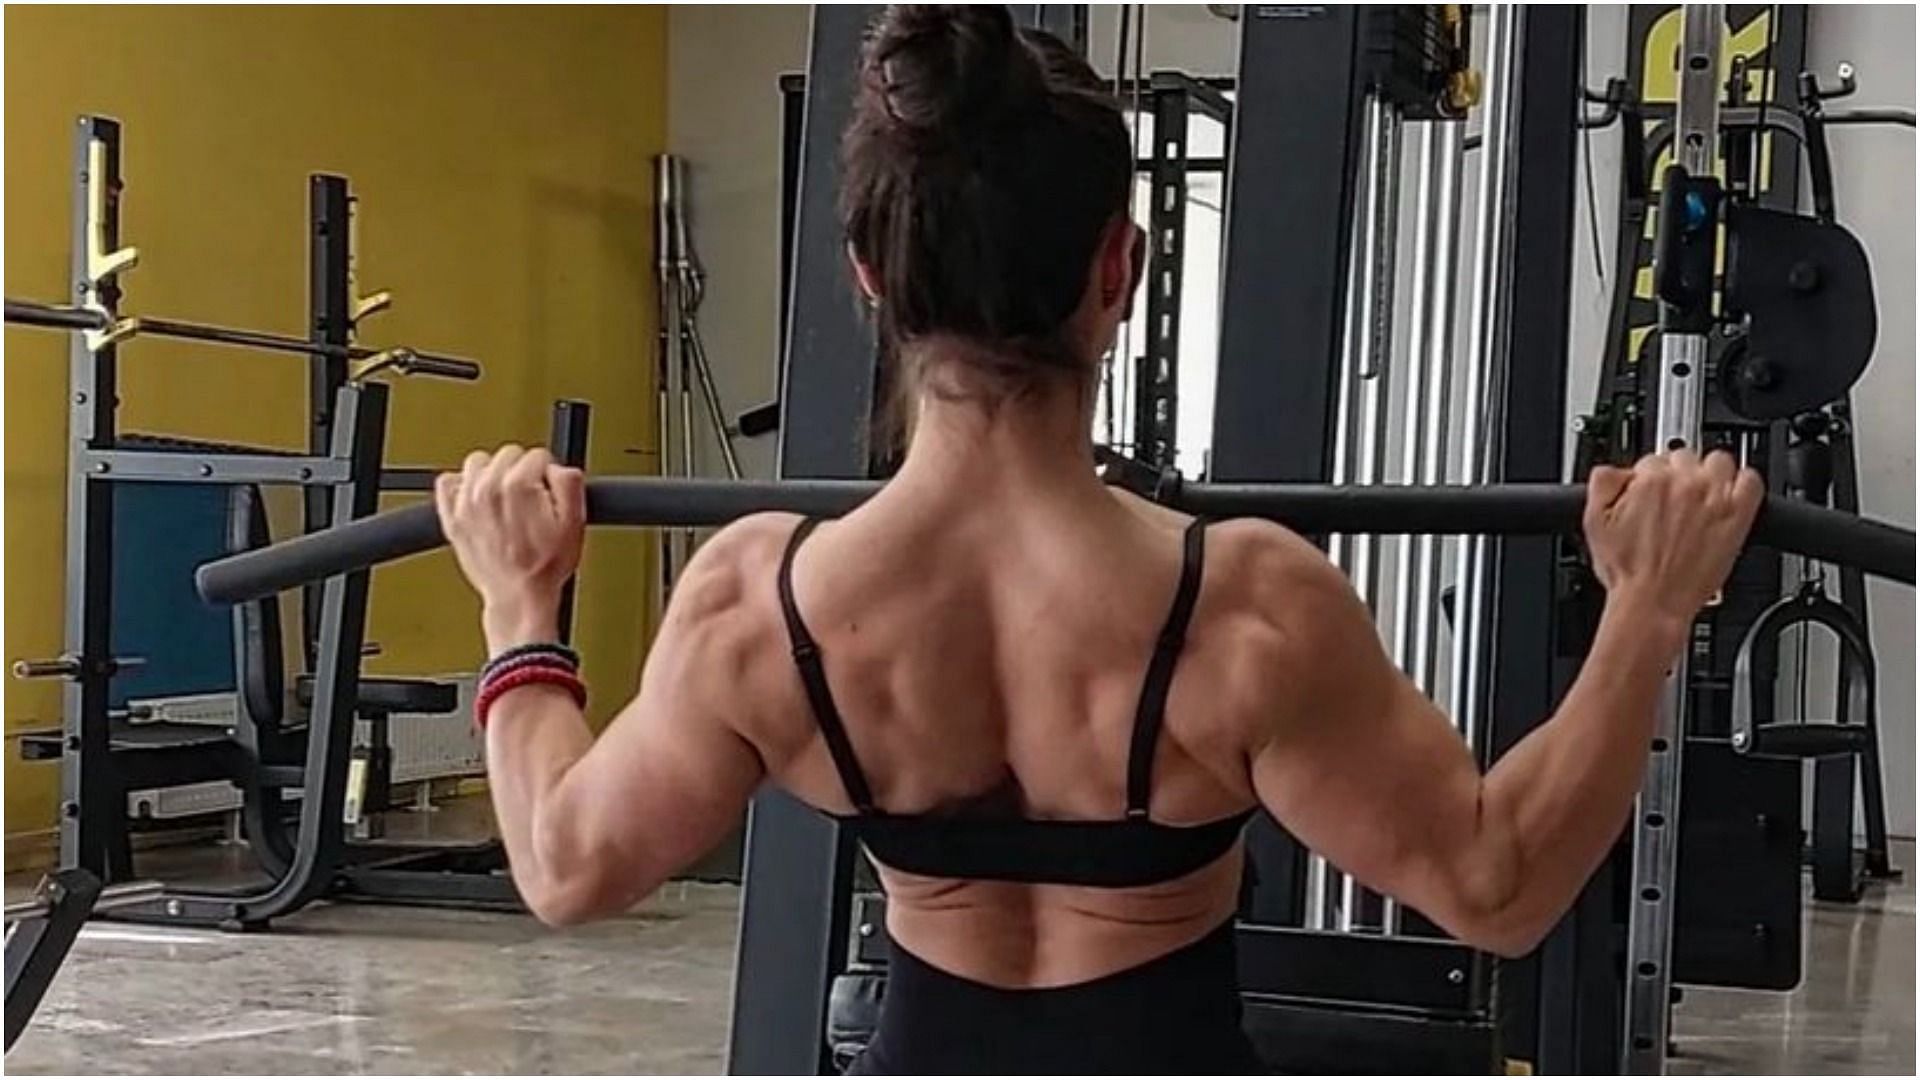 Lat pulldowns are an effective exercise to tone your back and shoulders. (Image by zafirova_kristina/Instagram)